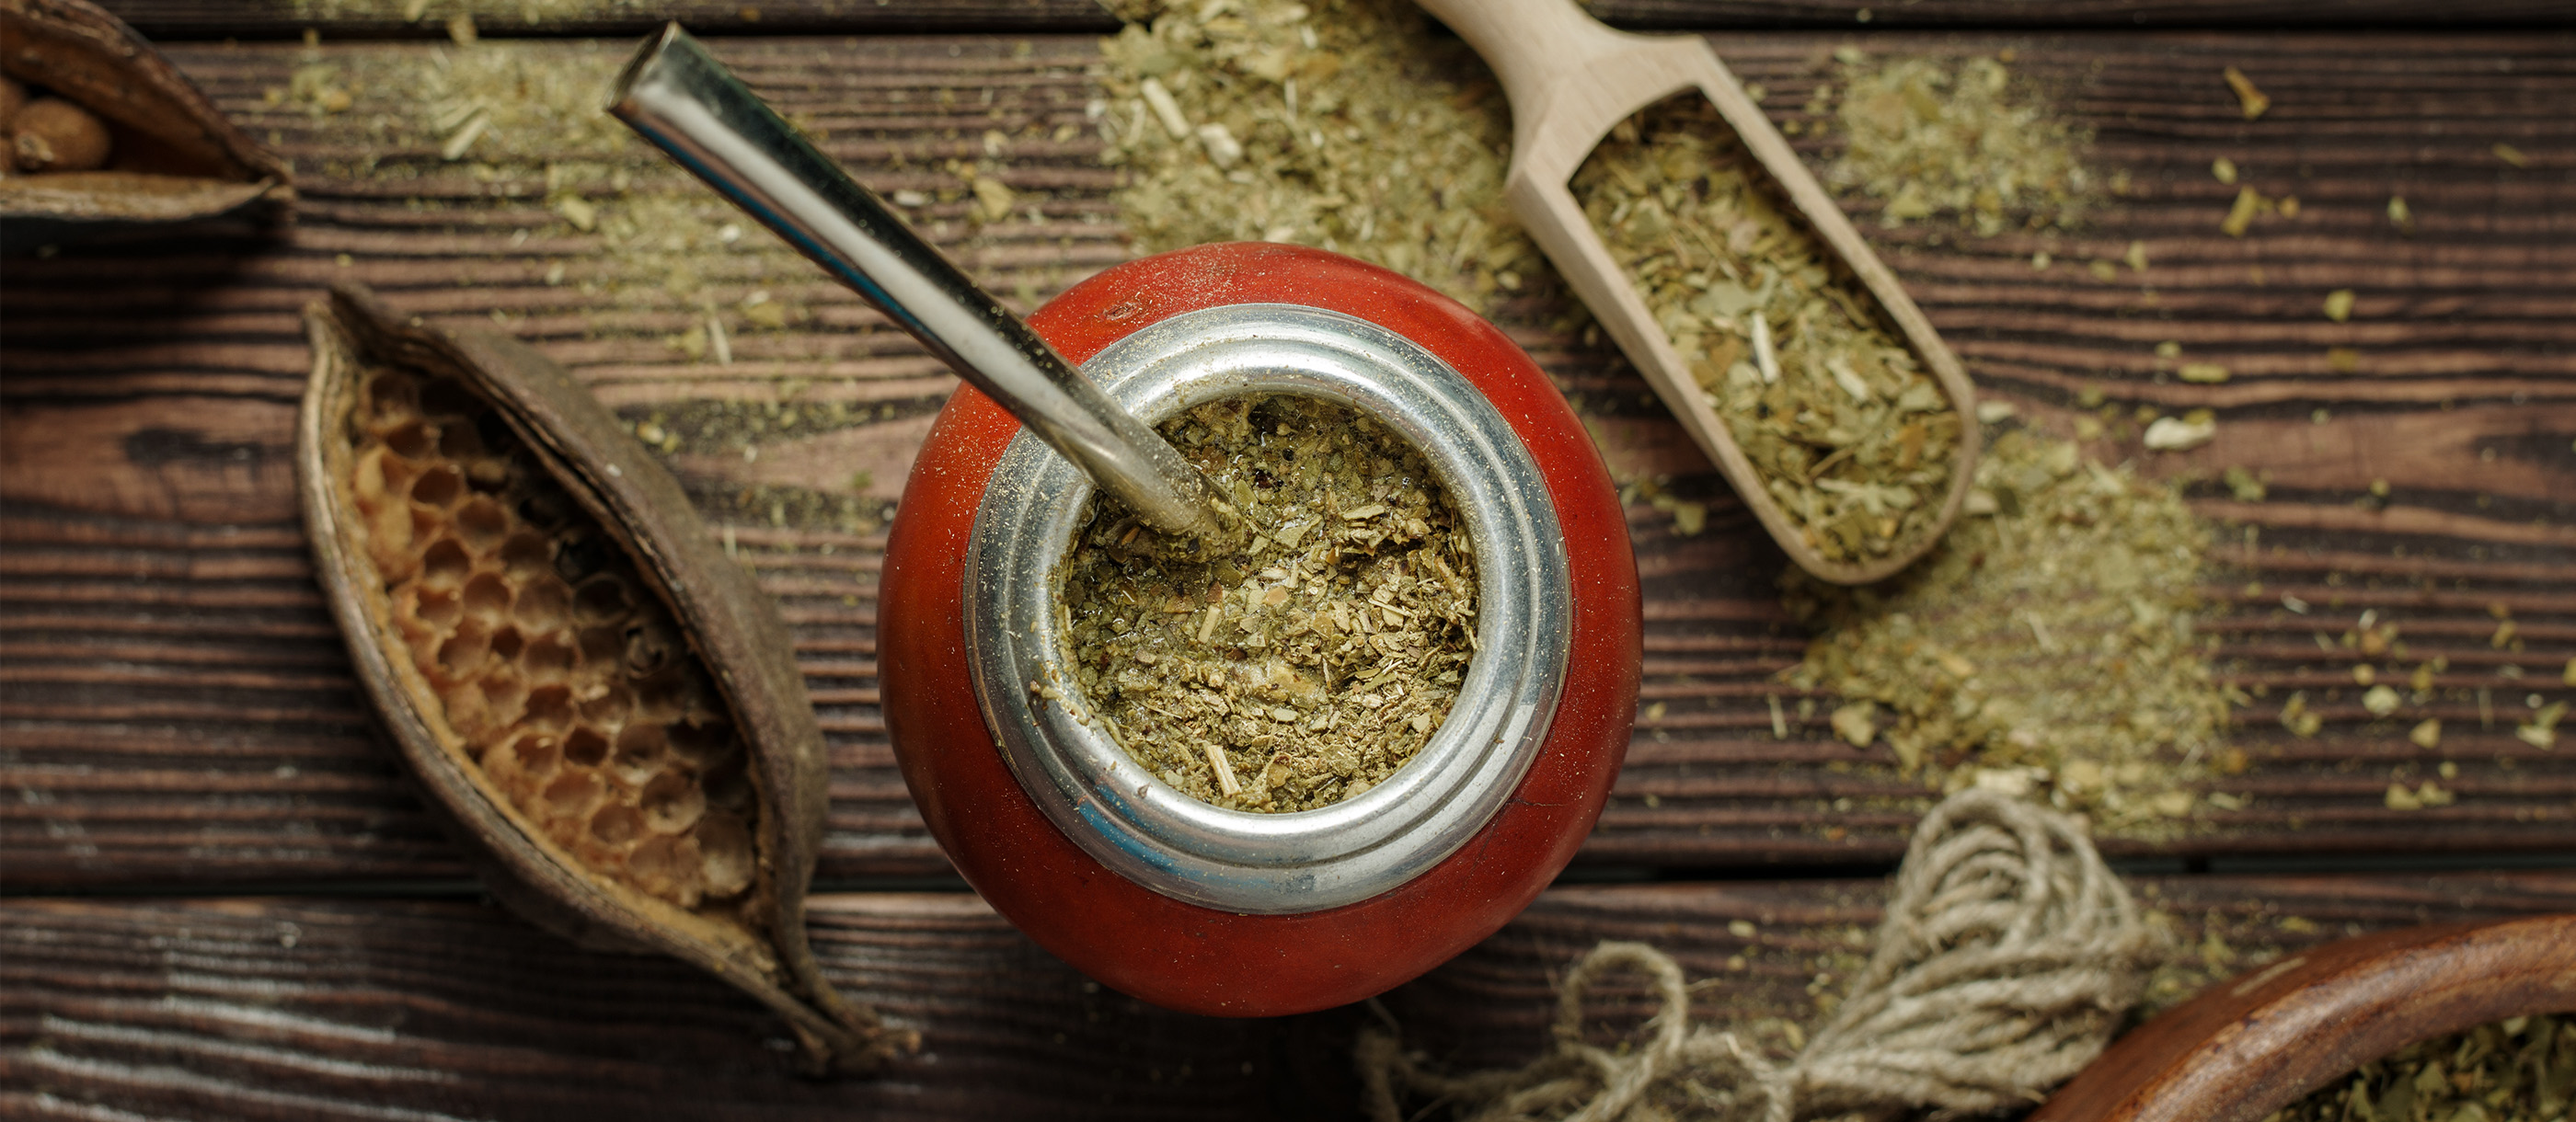 Mate  Local Herbal Infusion From Argentina